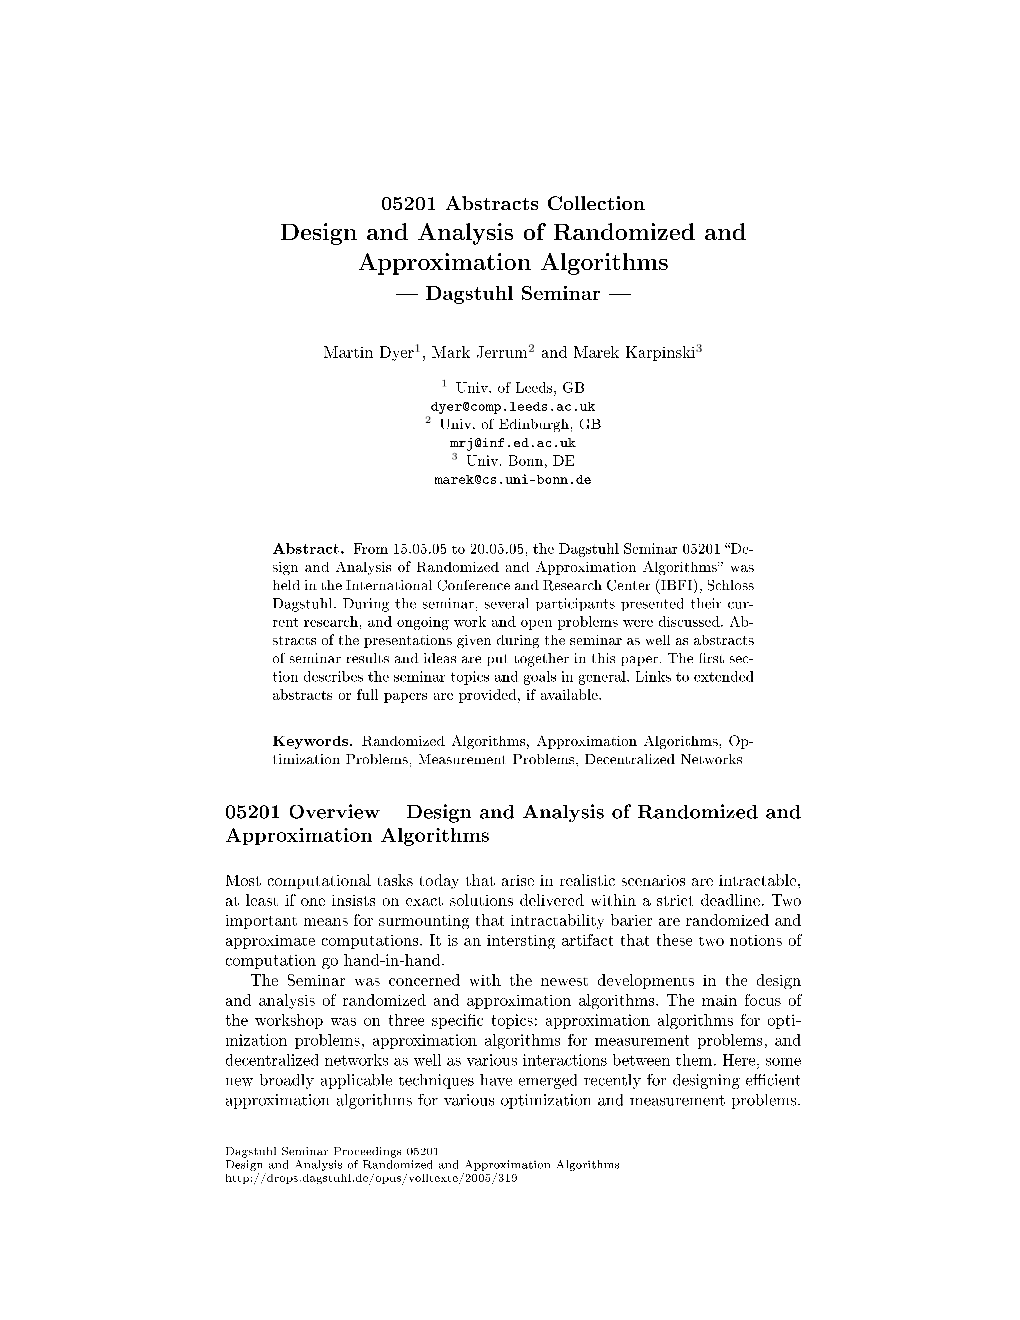 Design and Analysis of Randomized and Approximation Algorithms  Dagstuhl Seminar 